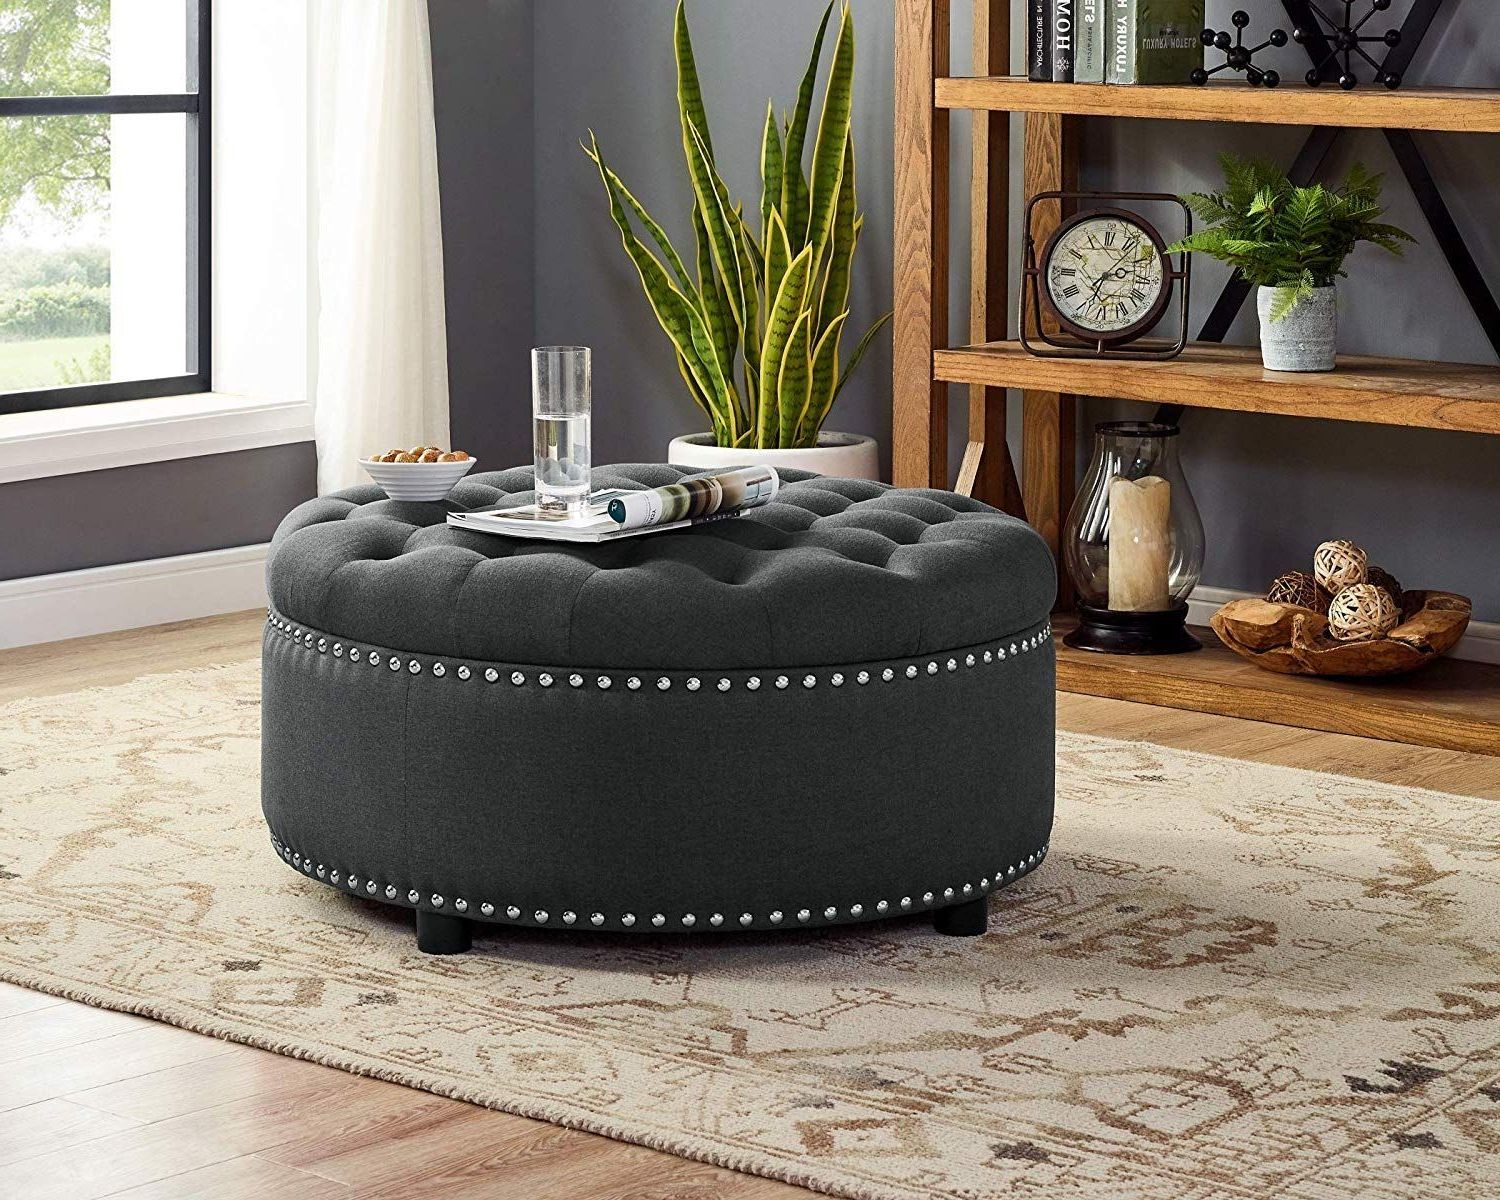 Widely Used Smoke Gray  Round Ottomans Throughout Dazone Round Storage Ottoman, Fabric Upholstered Nailhead Studded (View 3 of 10)